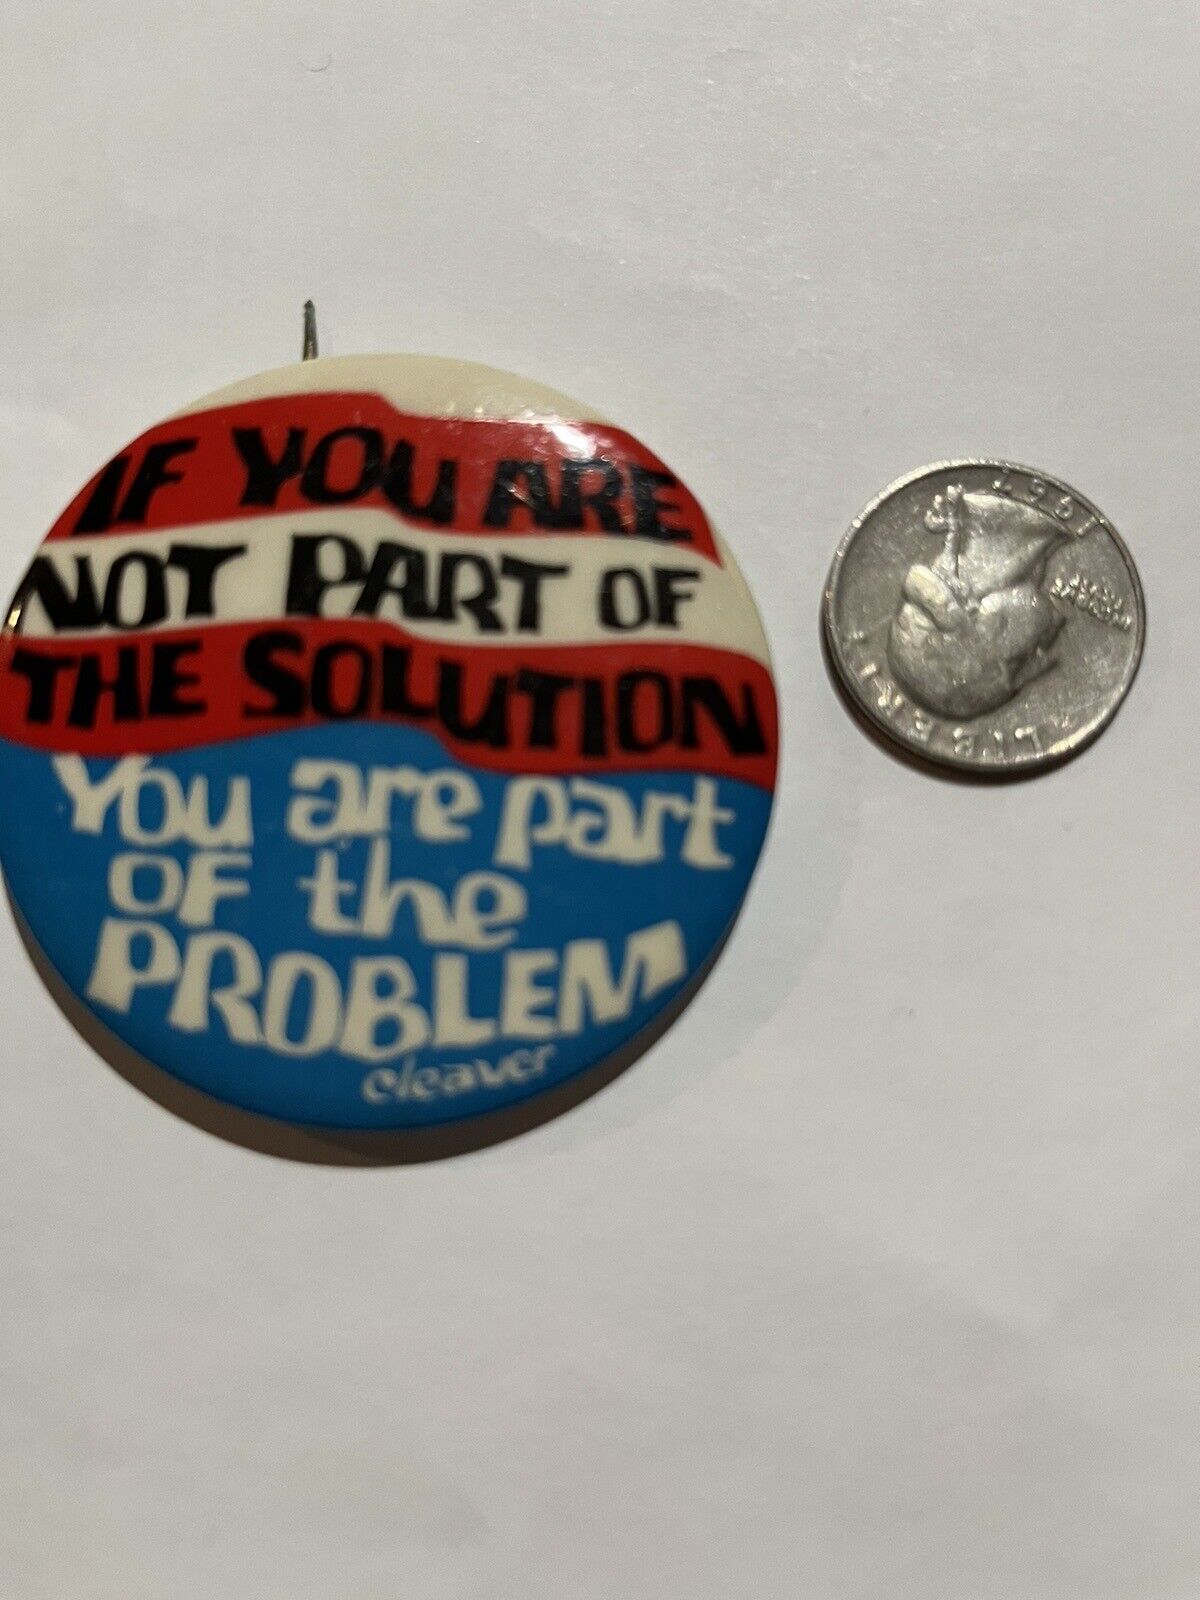 If You Are Not Part Of The Solution You Are Part Of The Problem  Button Cleaver